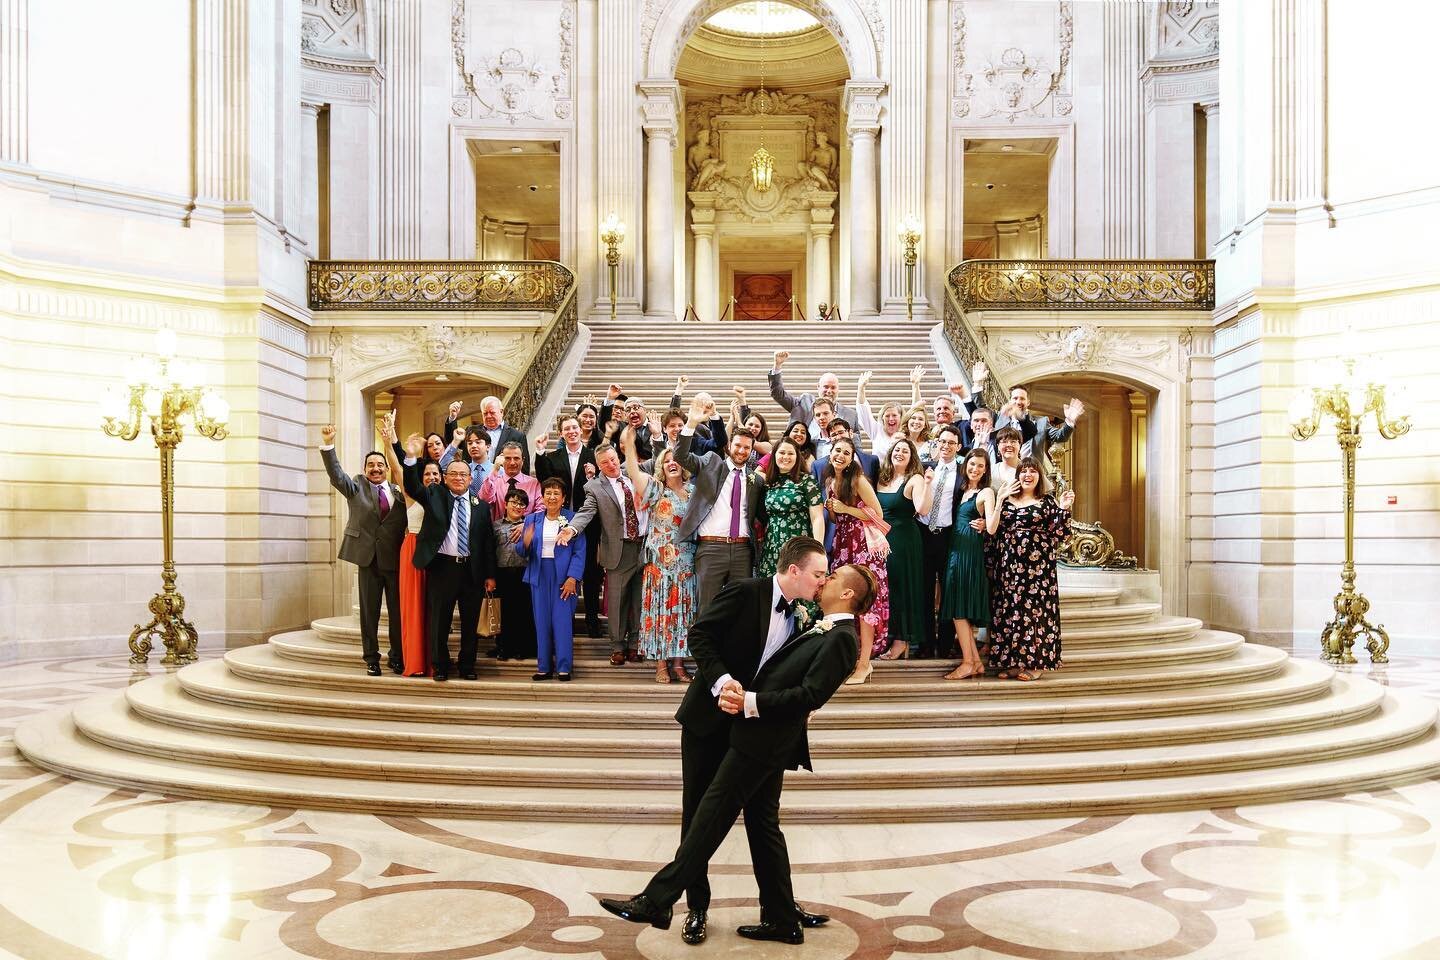 Had To Share!! Sam and Maurice&rsquo;s family couldn&rsquo;t wait to cheer them on after their wedding ceremony at San Francisco City Hall!

They had a one hour floor rental with plenty of seating for all of their guests. The fee is $1000 for the bea